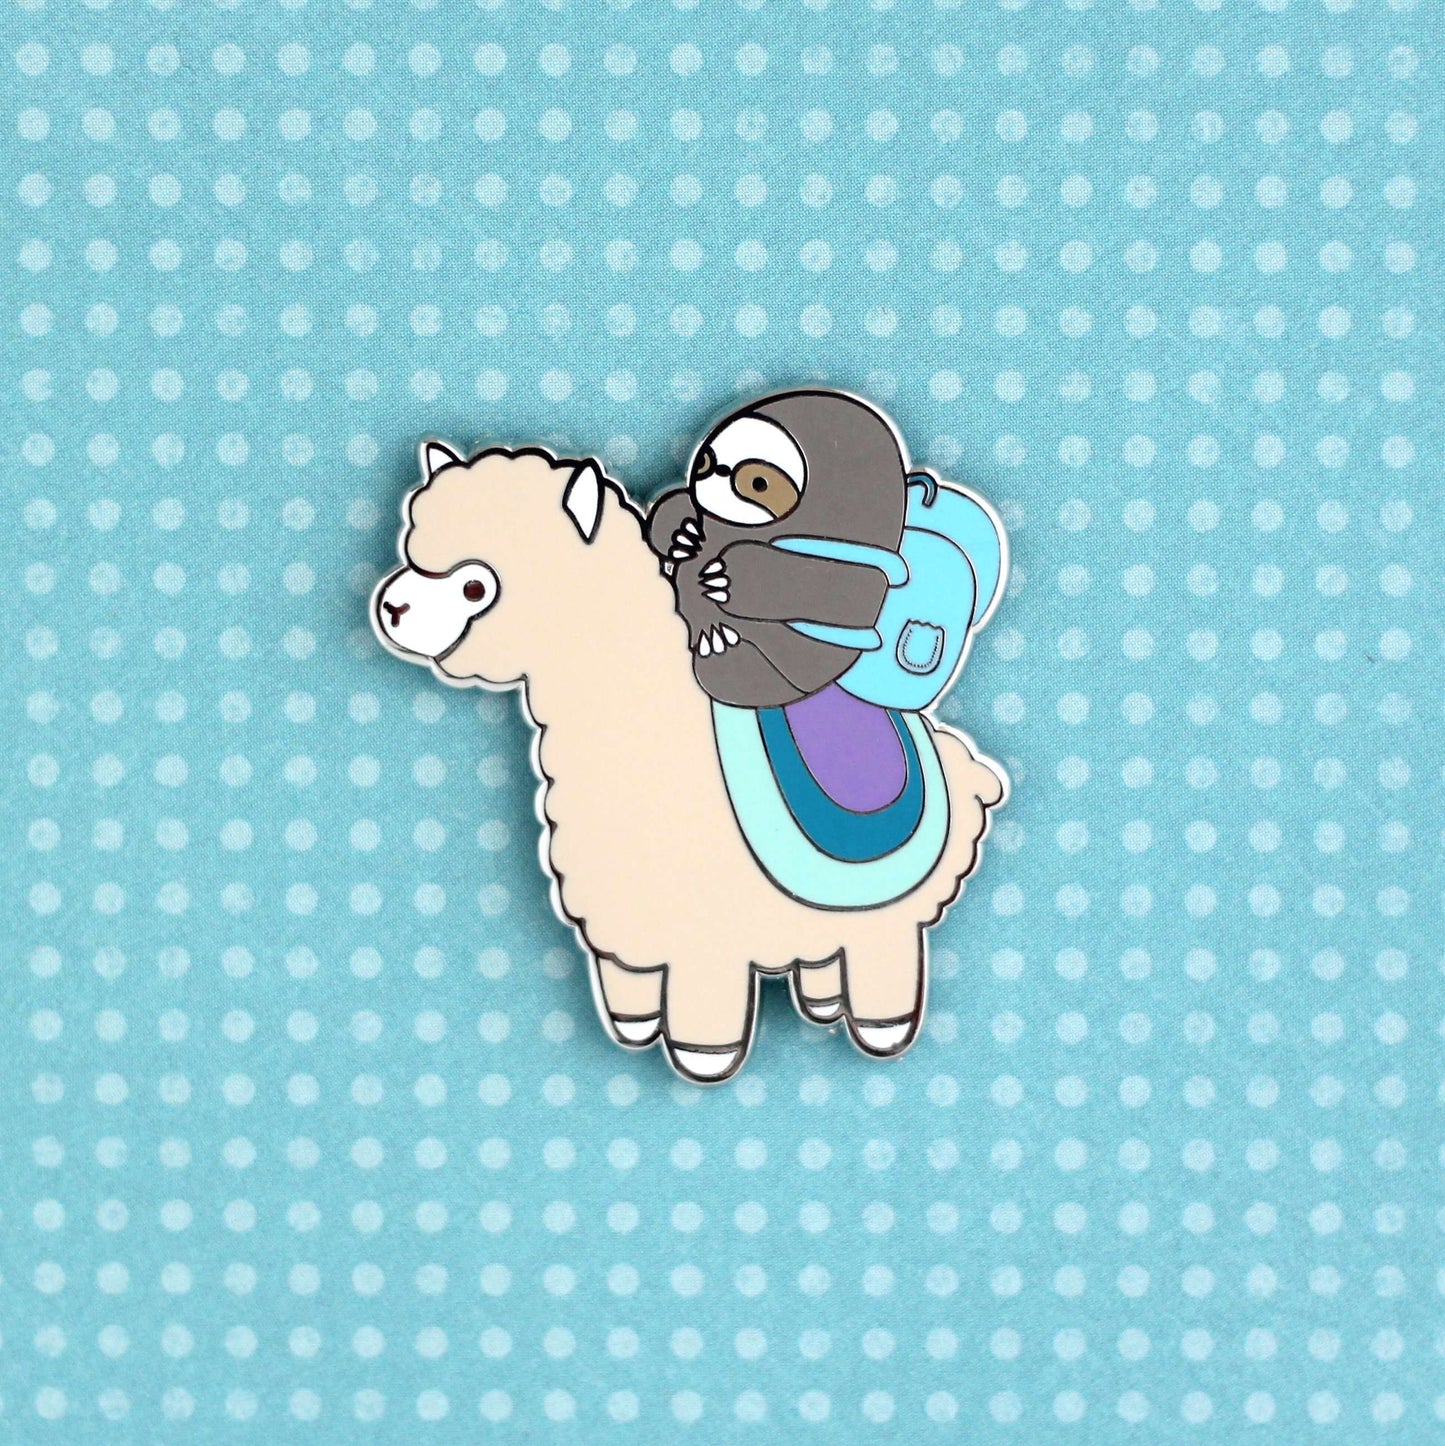 Sloth and Alpaca Adventurer Enamel Pin (Silver) - Llama Pin for Backpack - Sloth Gift by Wild Whimsy Woolies